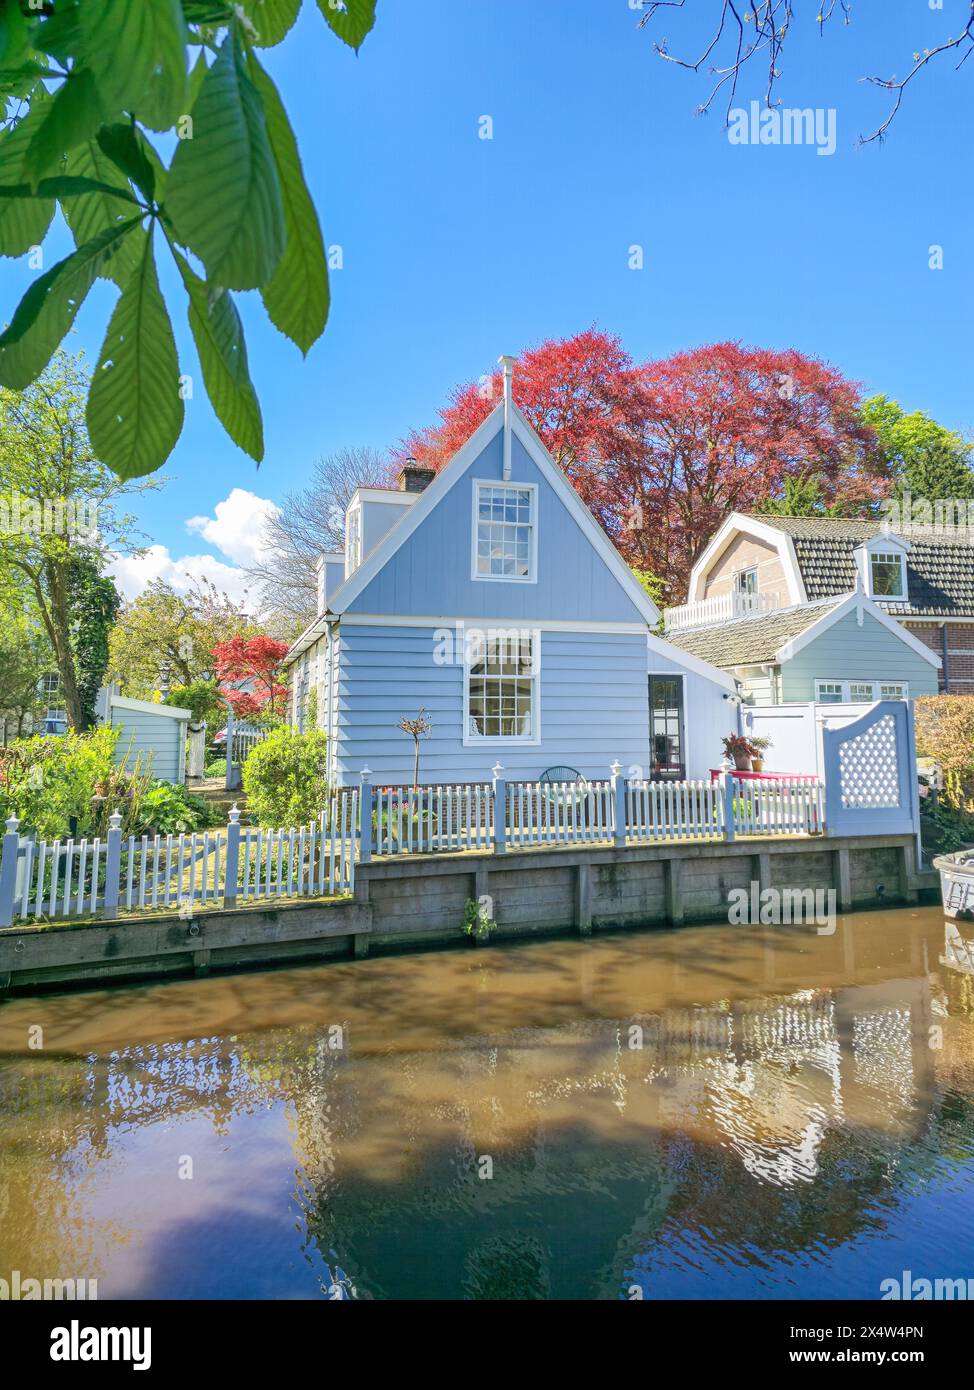 A charming blue house peacefully rests on the riverbank, surrounded by the tranquil waters and serene natural beauty. Broek in Waterland Netherlands  Stock Photo